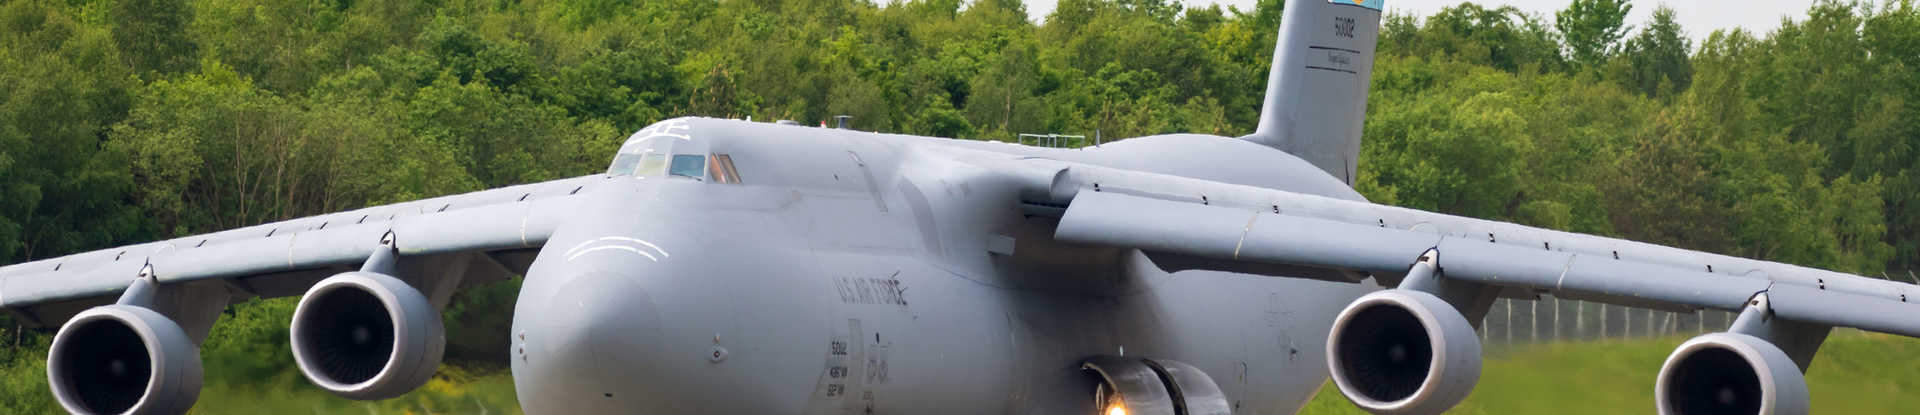 Go to press release: SwRI selected for $4.5 million contract to update C-5 aircraft